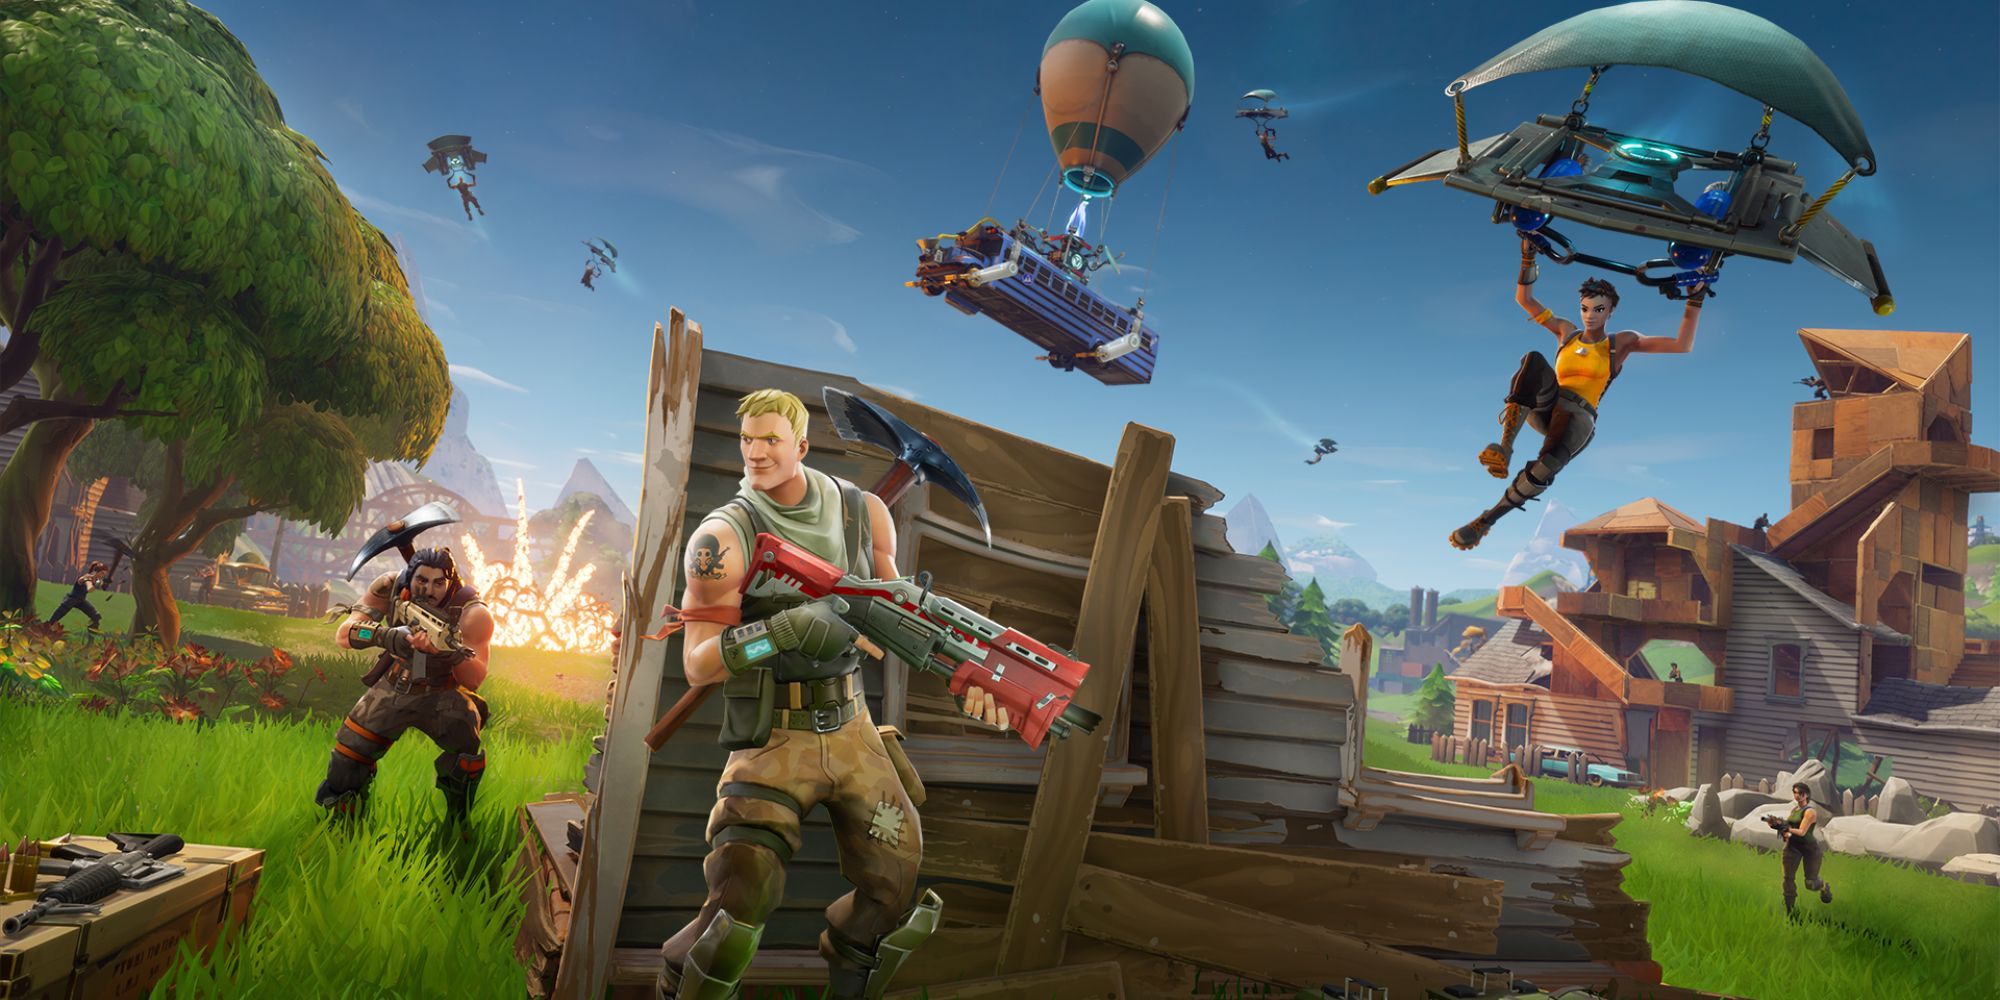 Fortnite key art for the game's first chapter, showing Jonesy hiding behidn cover.